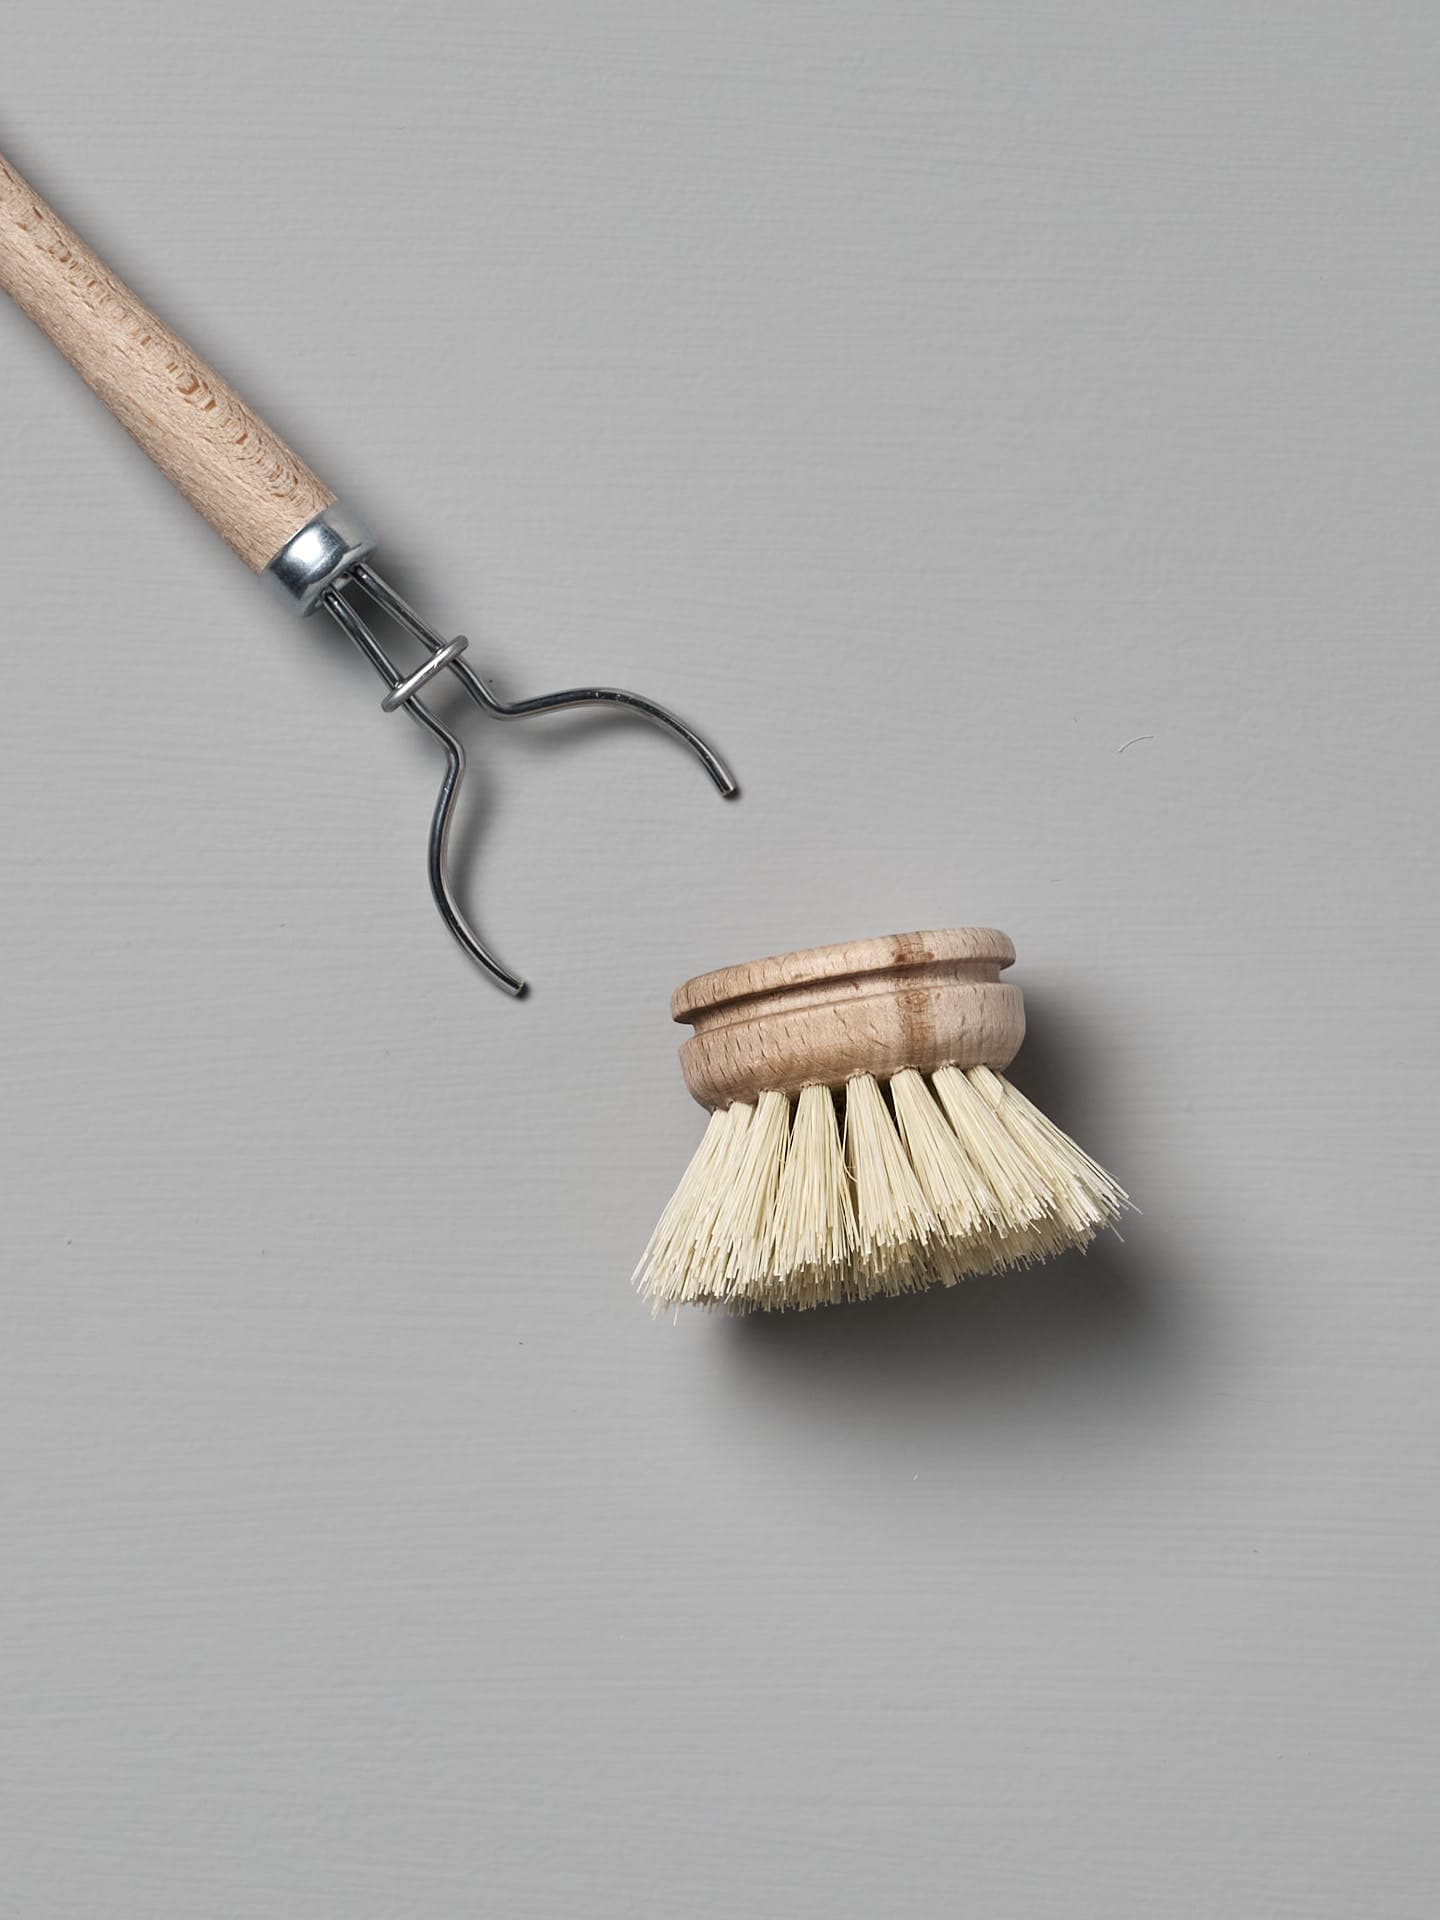 Iris Hantverk's Dish Brush with Replaceable Head featuring a detachable bristle head made from durable Tampico fibre, set against a gray background.